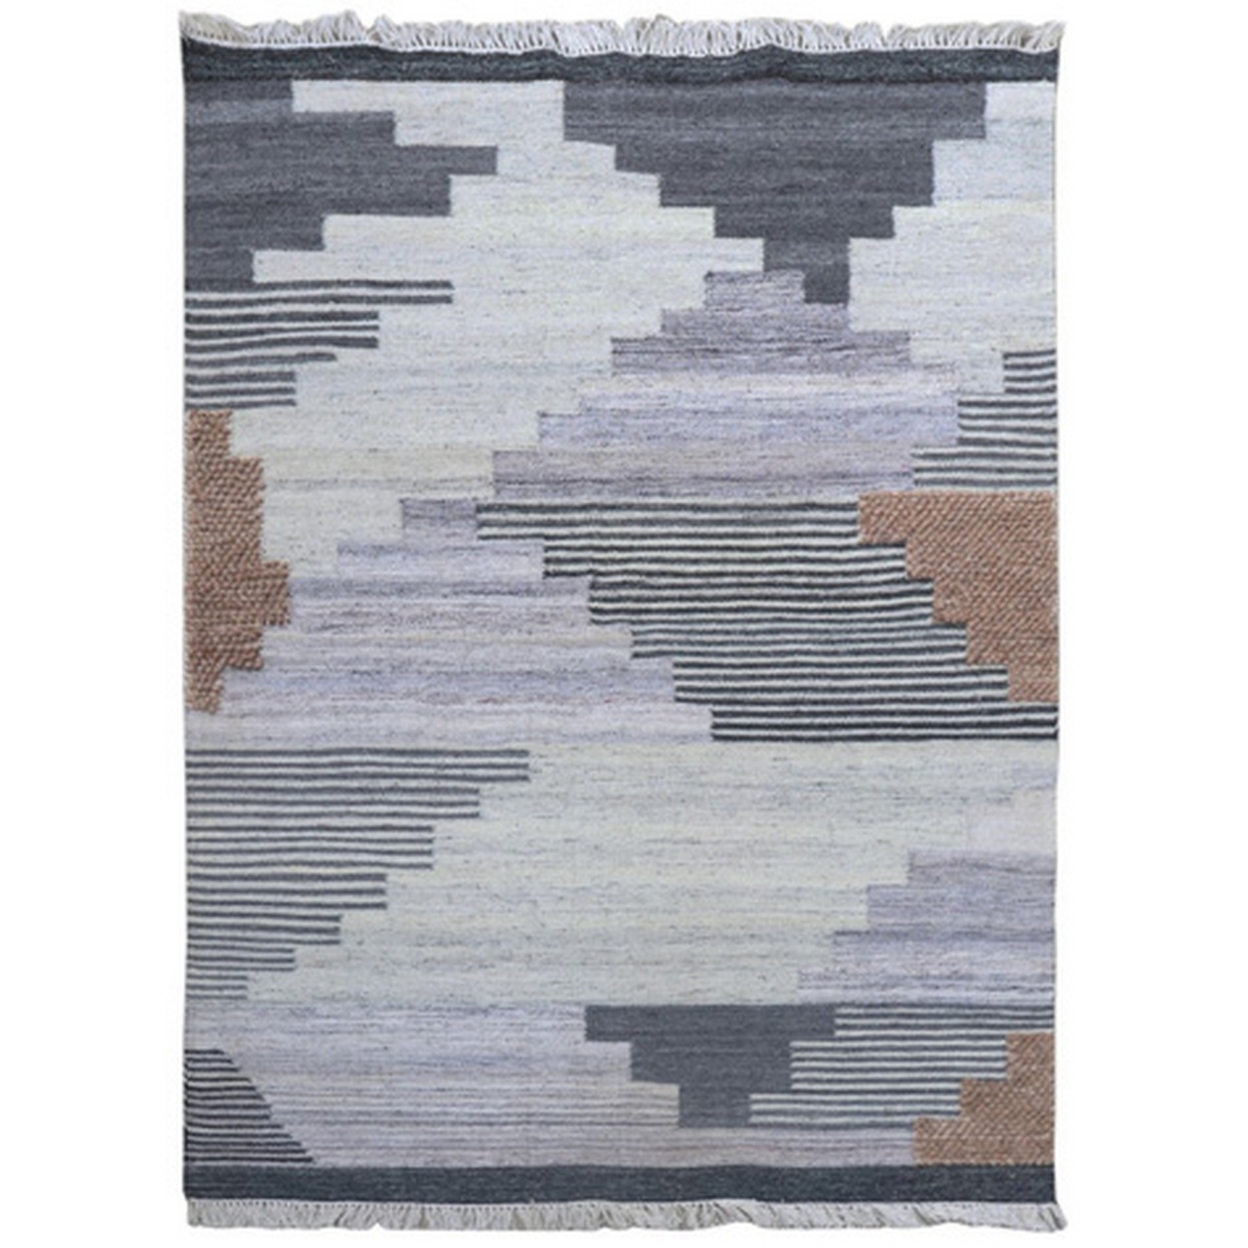 8 X 10 Modern Area Rug, Abstract Lined Cube Pattern, Soft Fabric Multicolor- Saltoro Sherpi